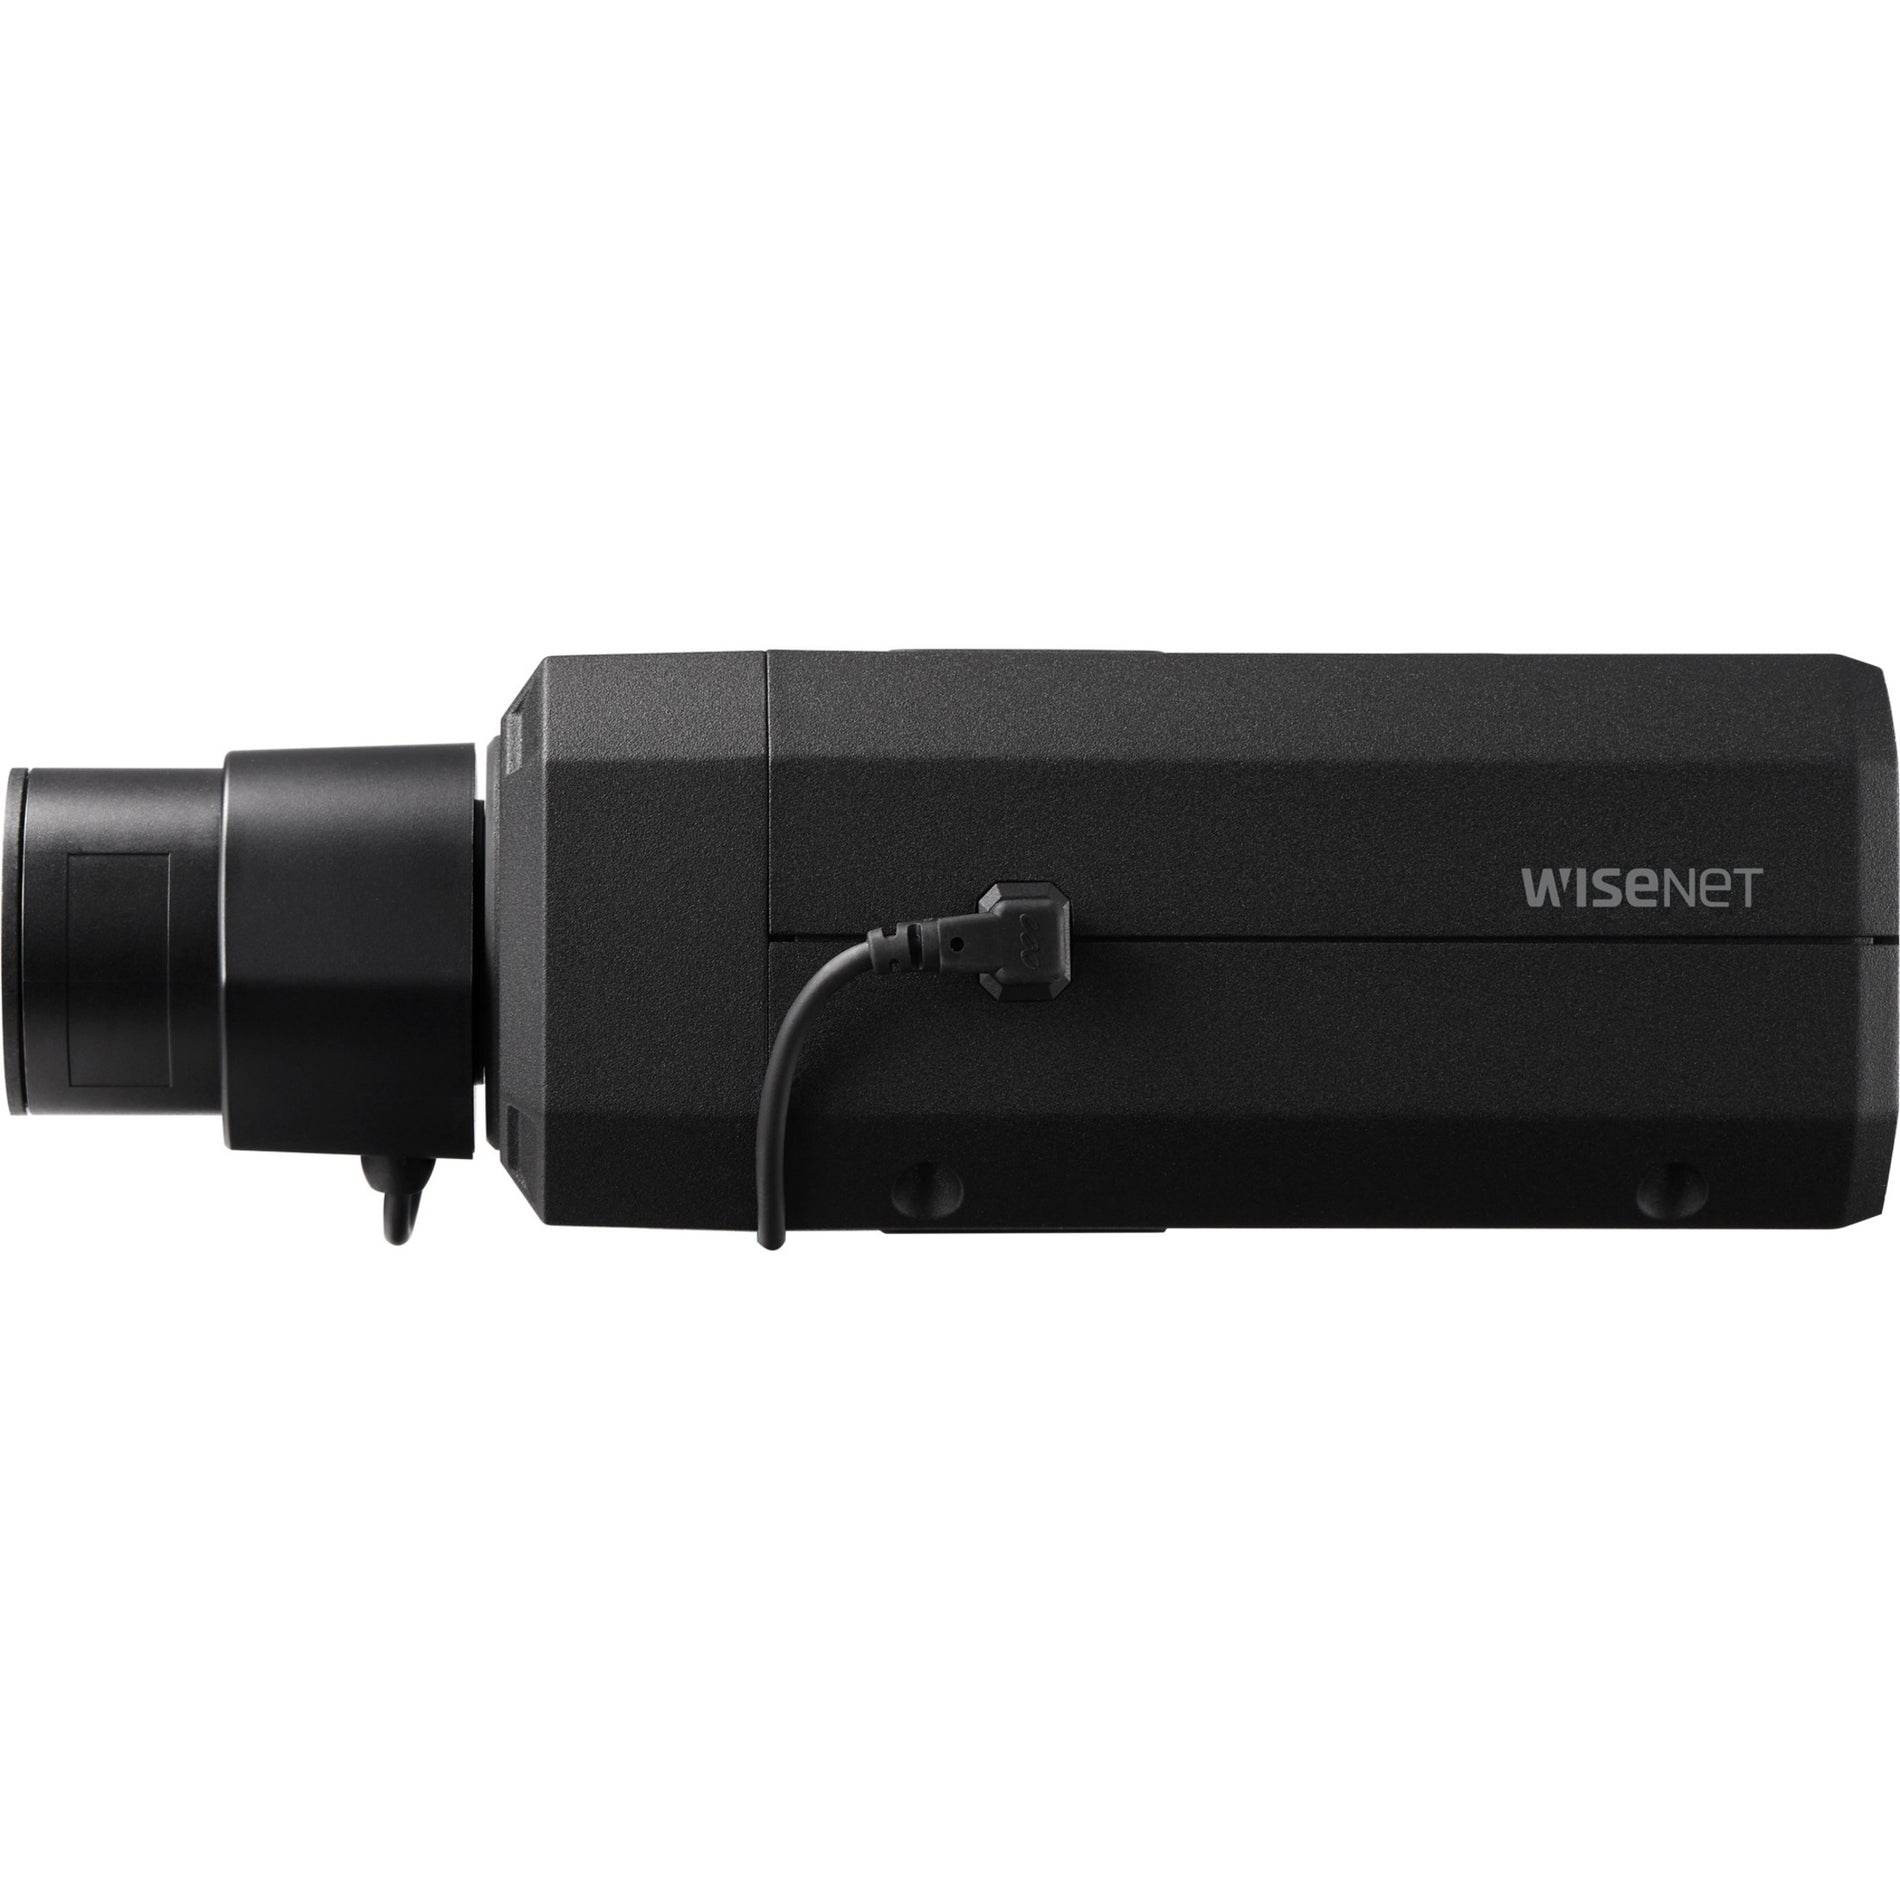 Wisenet XNB-8002 6MP Network Box Camera, 30fps Triple Codec H.265/H.264/MJPEG with WiseStreamII Technology, Extreme WDR, USB and CVBS Port, Advanced Video Analytics